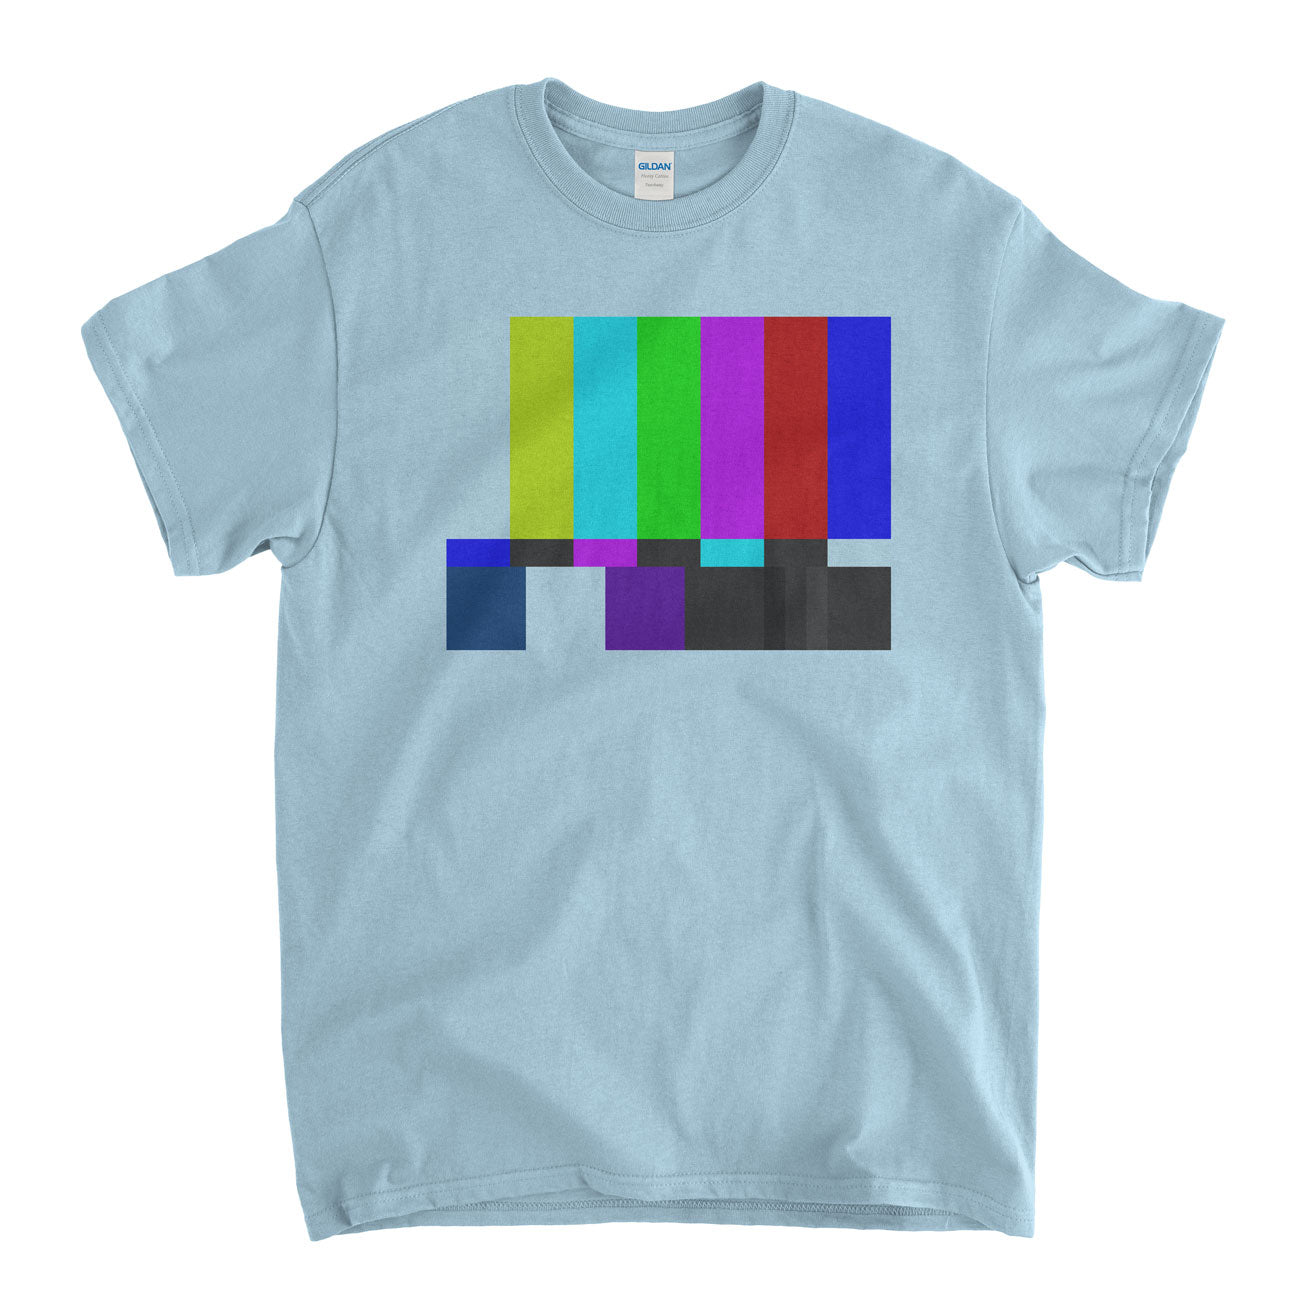 TV Colour Bars T shirt - An Old Skool Hooligans TV Classic As Worn In The Big Bang Theory